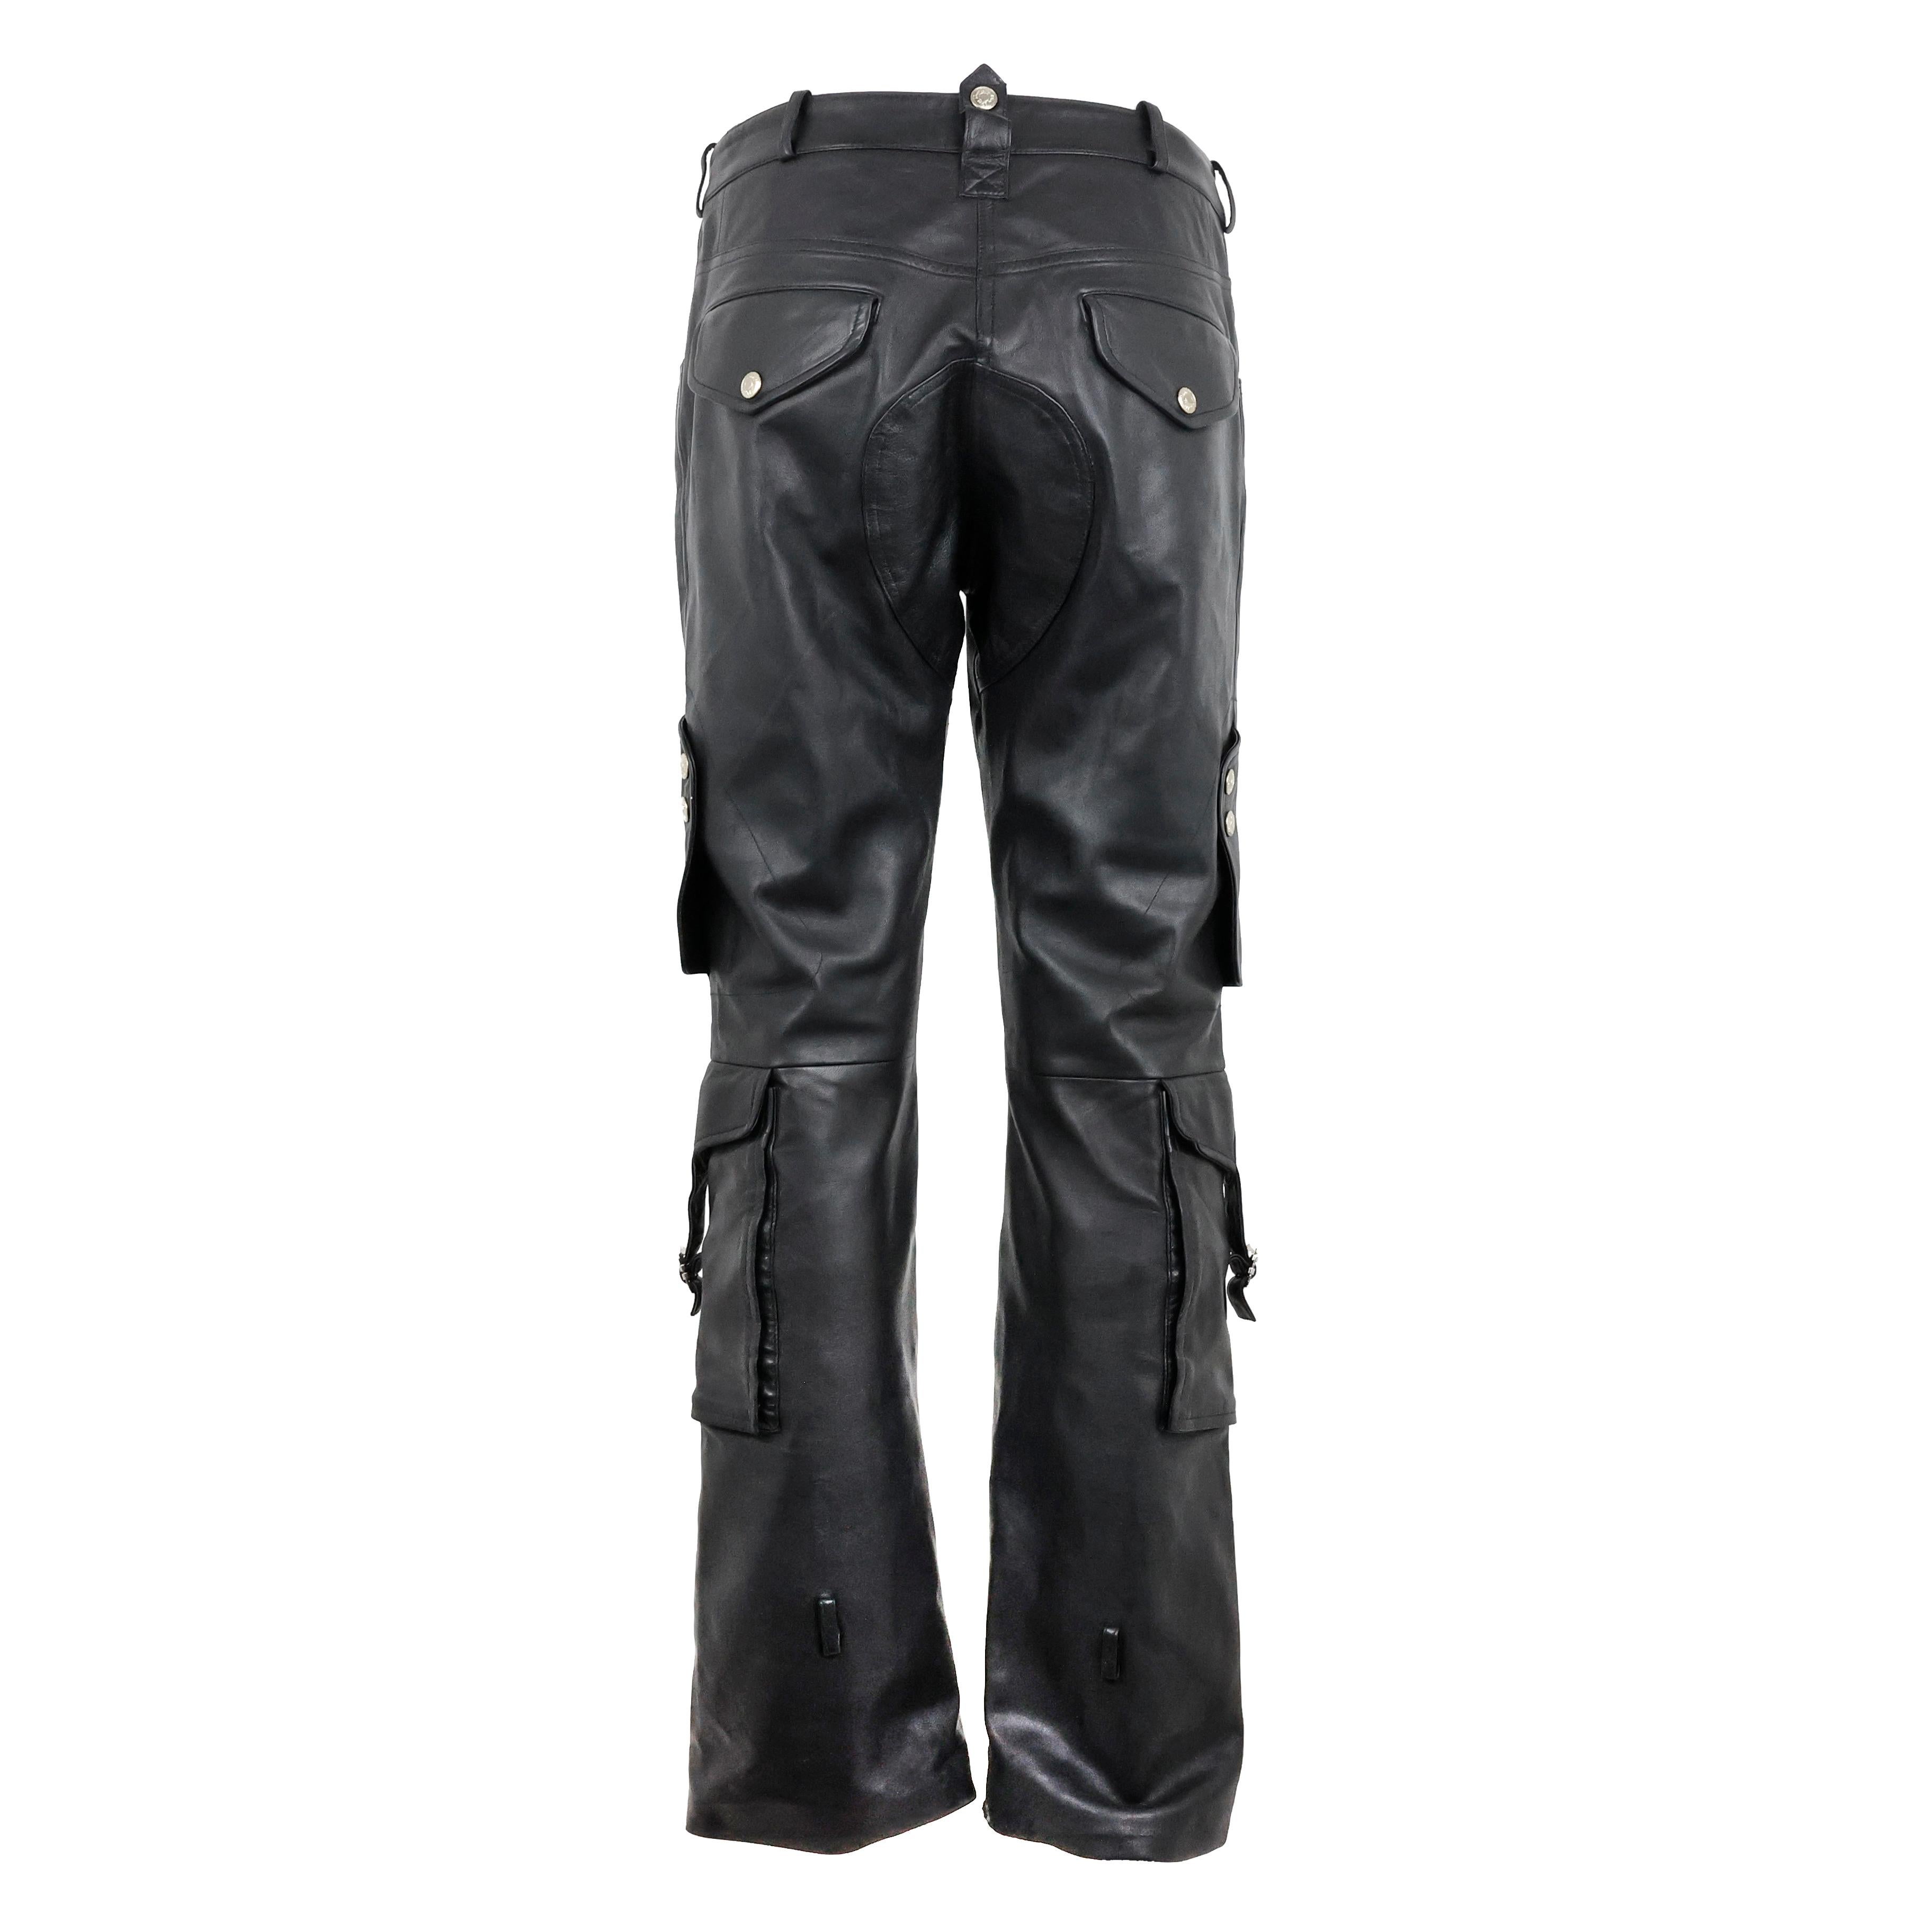 Rare Christian Dior by John Galliano cargo leather pants color black. Size 38 FR.

Condition:
Really good/good. Minimal and not visible signs of wear.